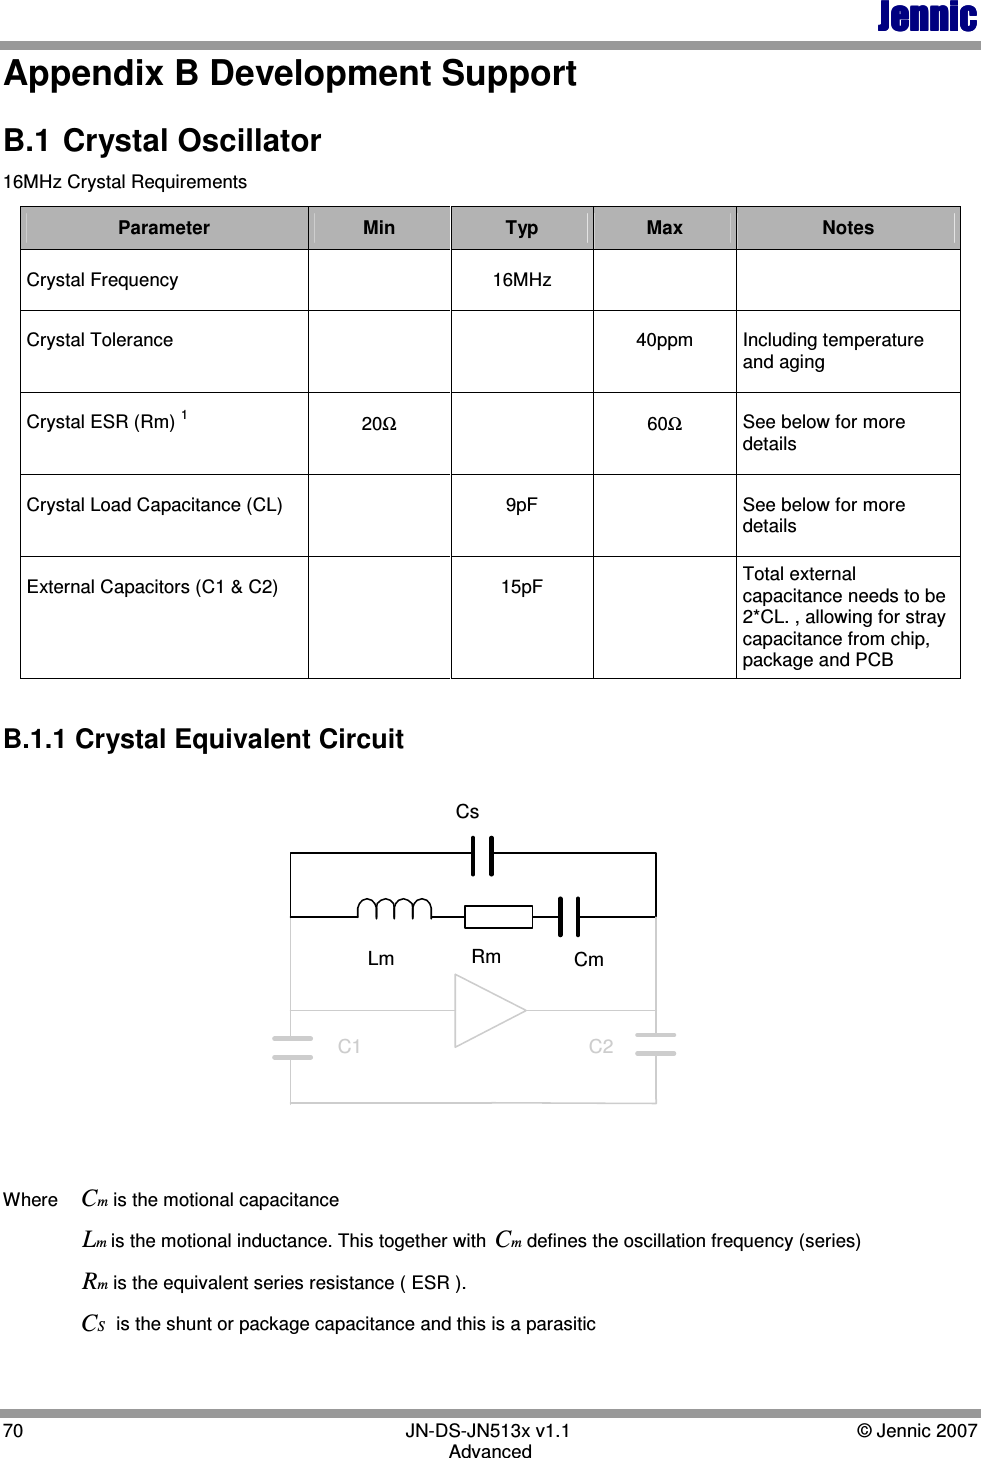 JennicJennicJennicJennic 70        JN-DS-JN513x v1.1  © Jennic 2007 Advanced Appendix B Development Support B.1  Crystal Oscillator 16MHz Crystal Requirements Parameter  Min  Typ  Max  Notes Crystal Frequency    16MHz     Crystal Tolerance      40ppm  Including temperature and aging Crystal ESR (Rm) 1 20Ω  60Ω See below for more details   Crystal Load Capacitance (CL)    9pF    See below for more details   External Capacitors (C1 &amp; C2)     15pF    Total external capacitance needs to be 2*CL. , allowing for stray capacitance from chip, package and PCB   B.1.1 Crystal Equivalent Circuit  CsLm CmRmC2C1  Where  mCis the motional capacitance   mLis the motional inductance. This together with mCdefines the oscillation frequency (series)  mRis the equivalent series resistance ( ESR ).   SC is the shunt or package capacitance and this is a parasitic  